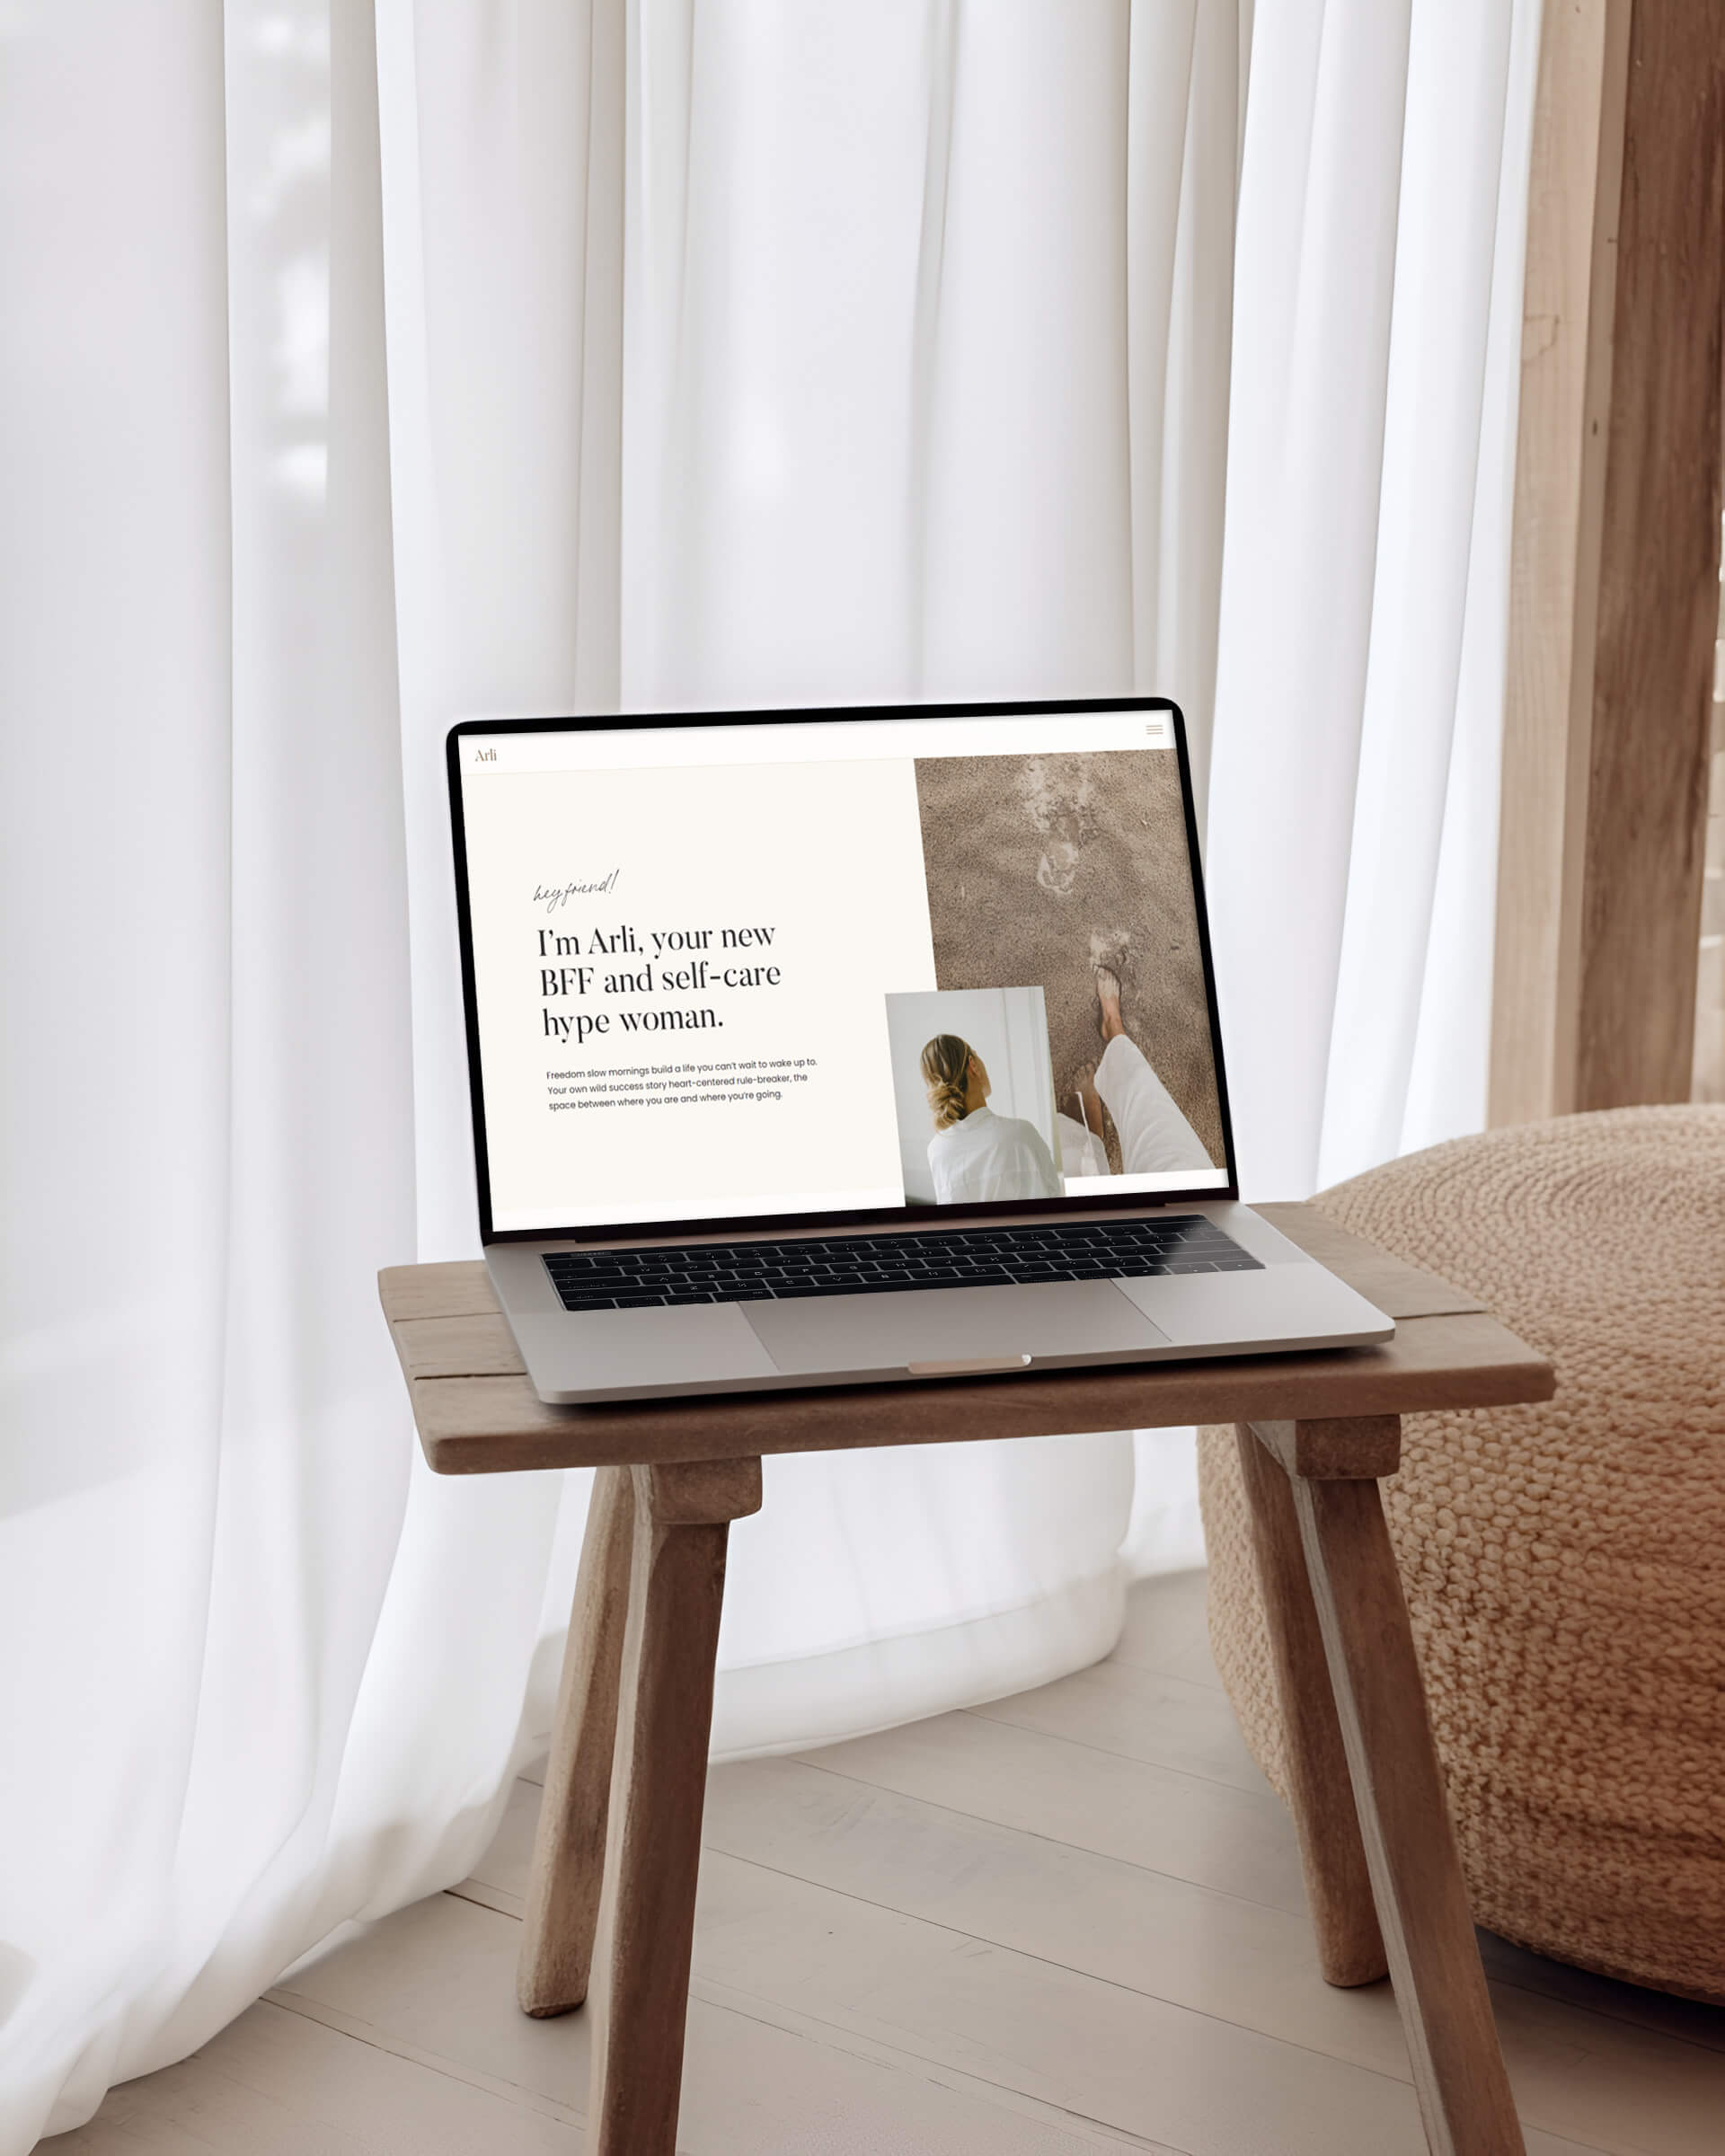 A mockup of the Arli Website Template in a macbook on a wooden chair